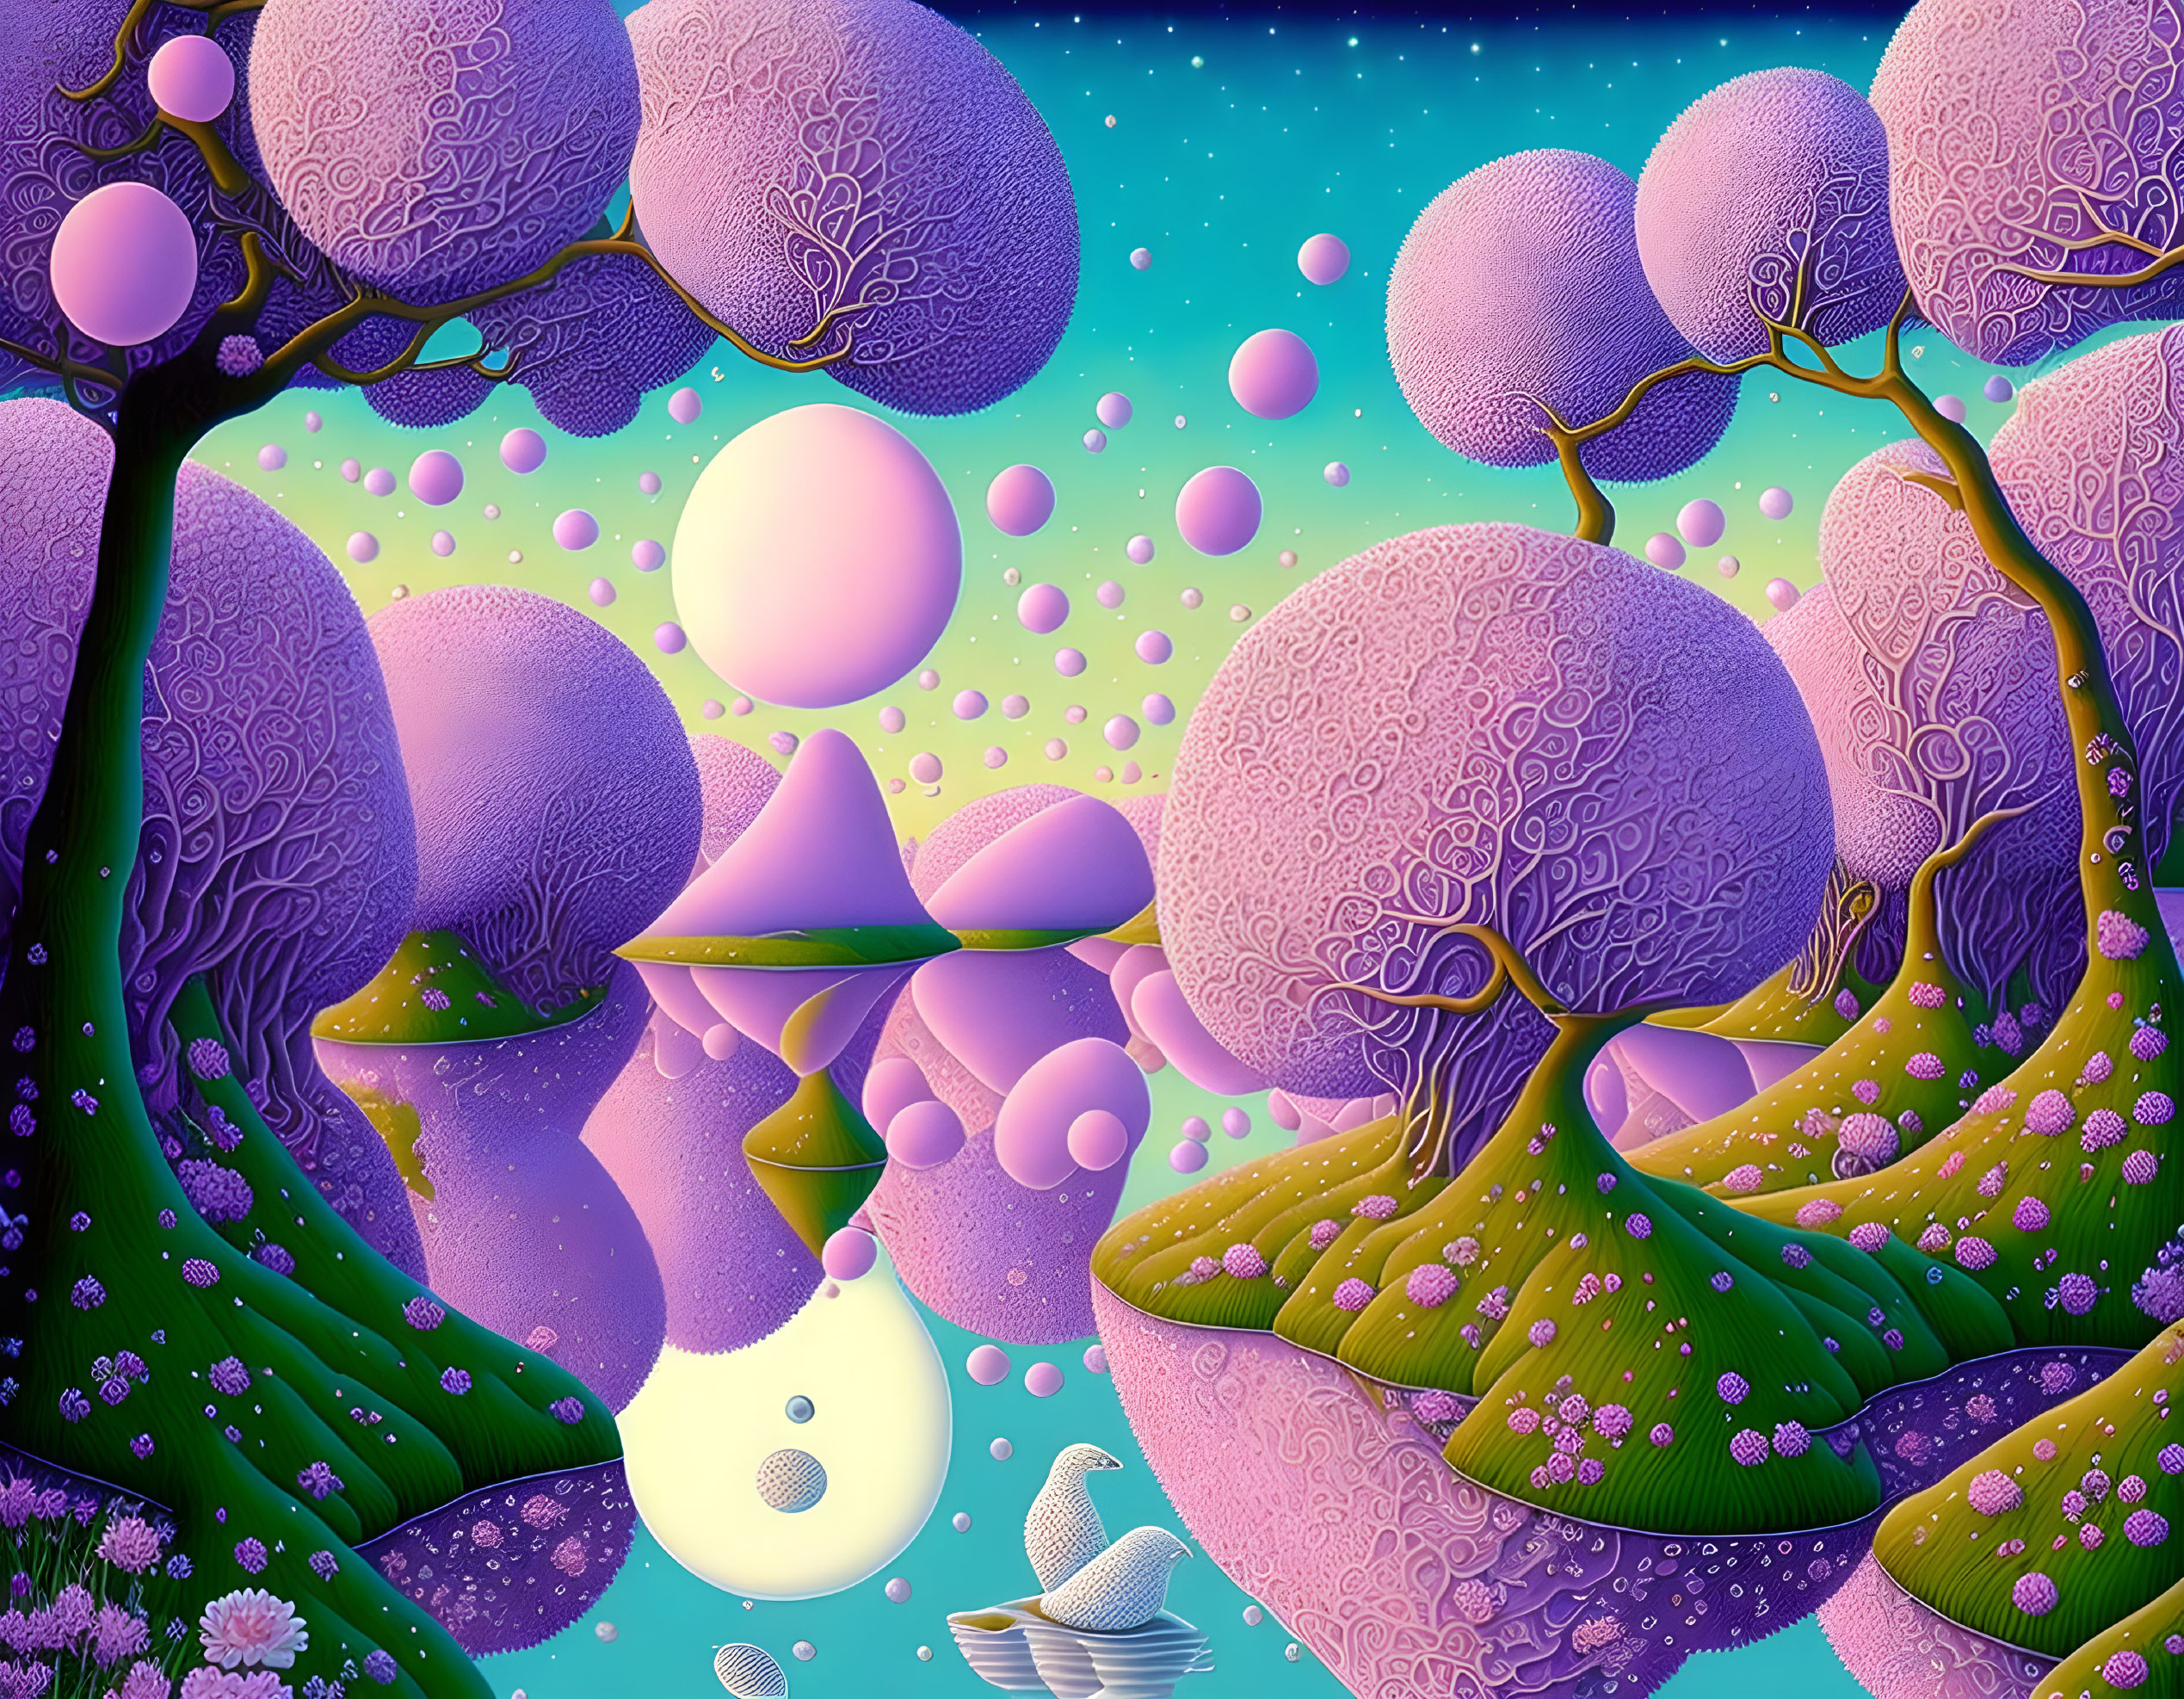 Colorful landscape with purple trees, pink spheres, water reflection, and starlit sky